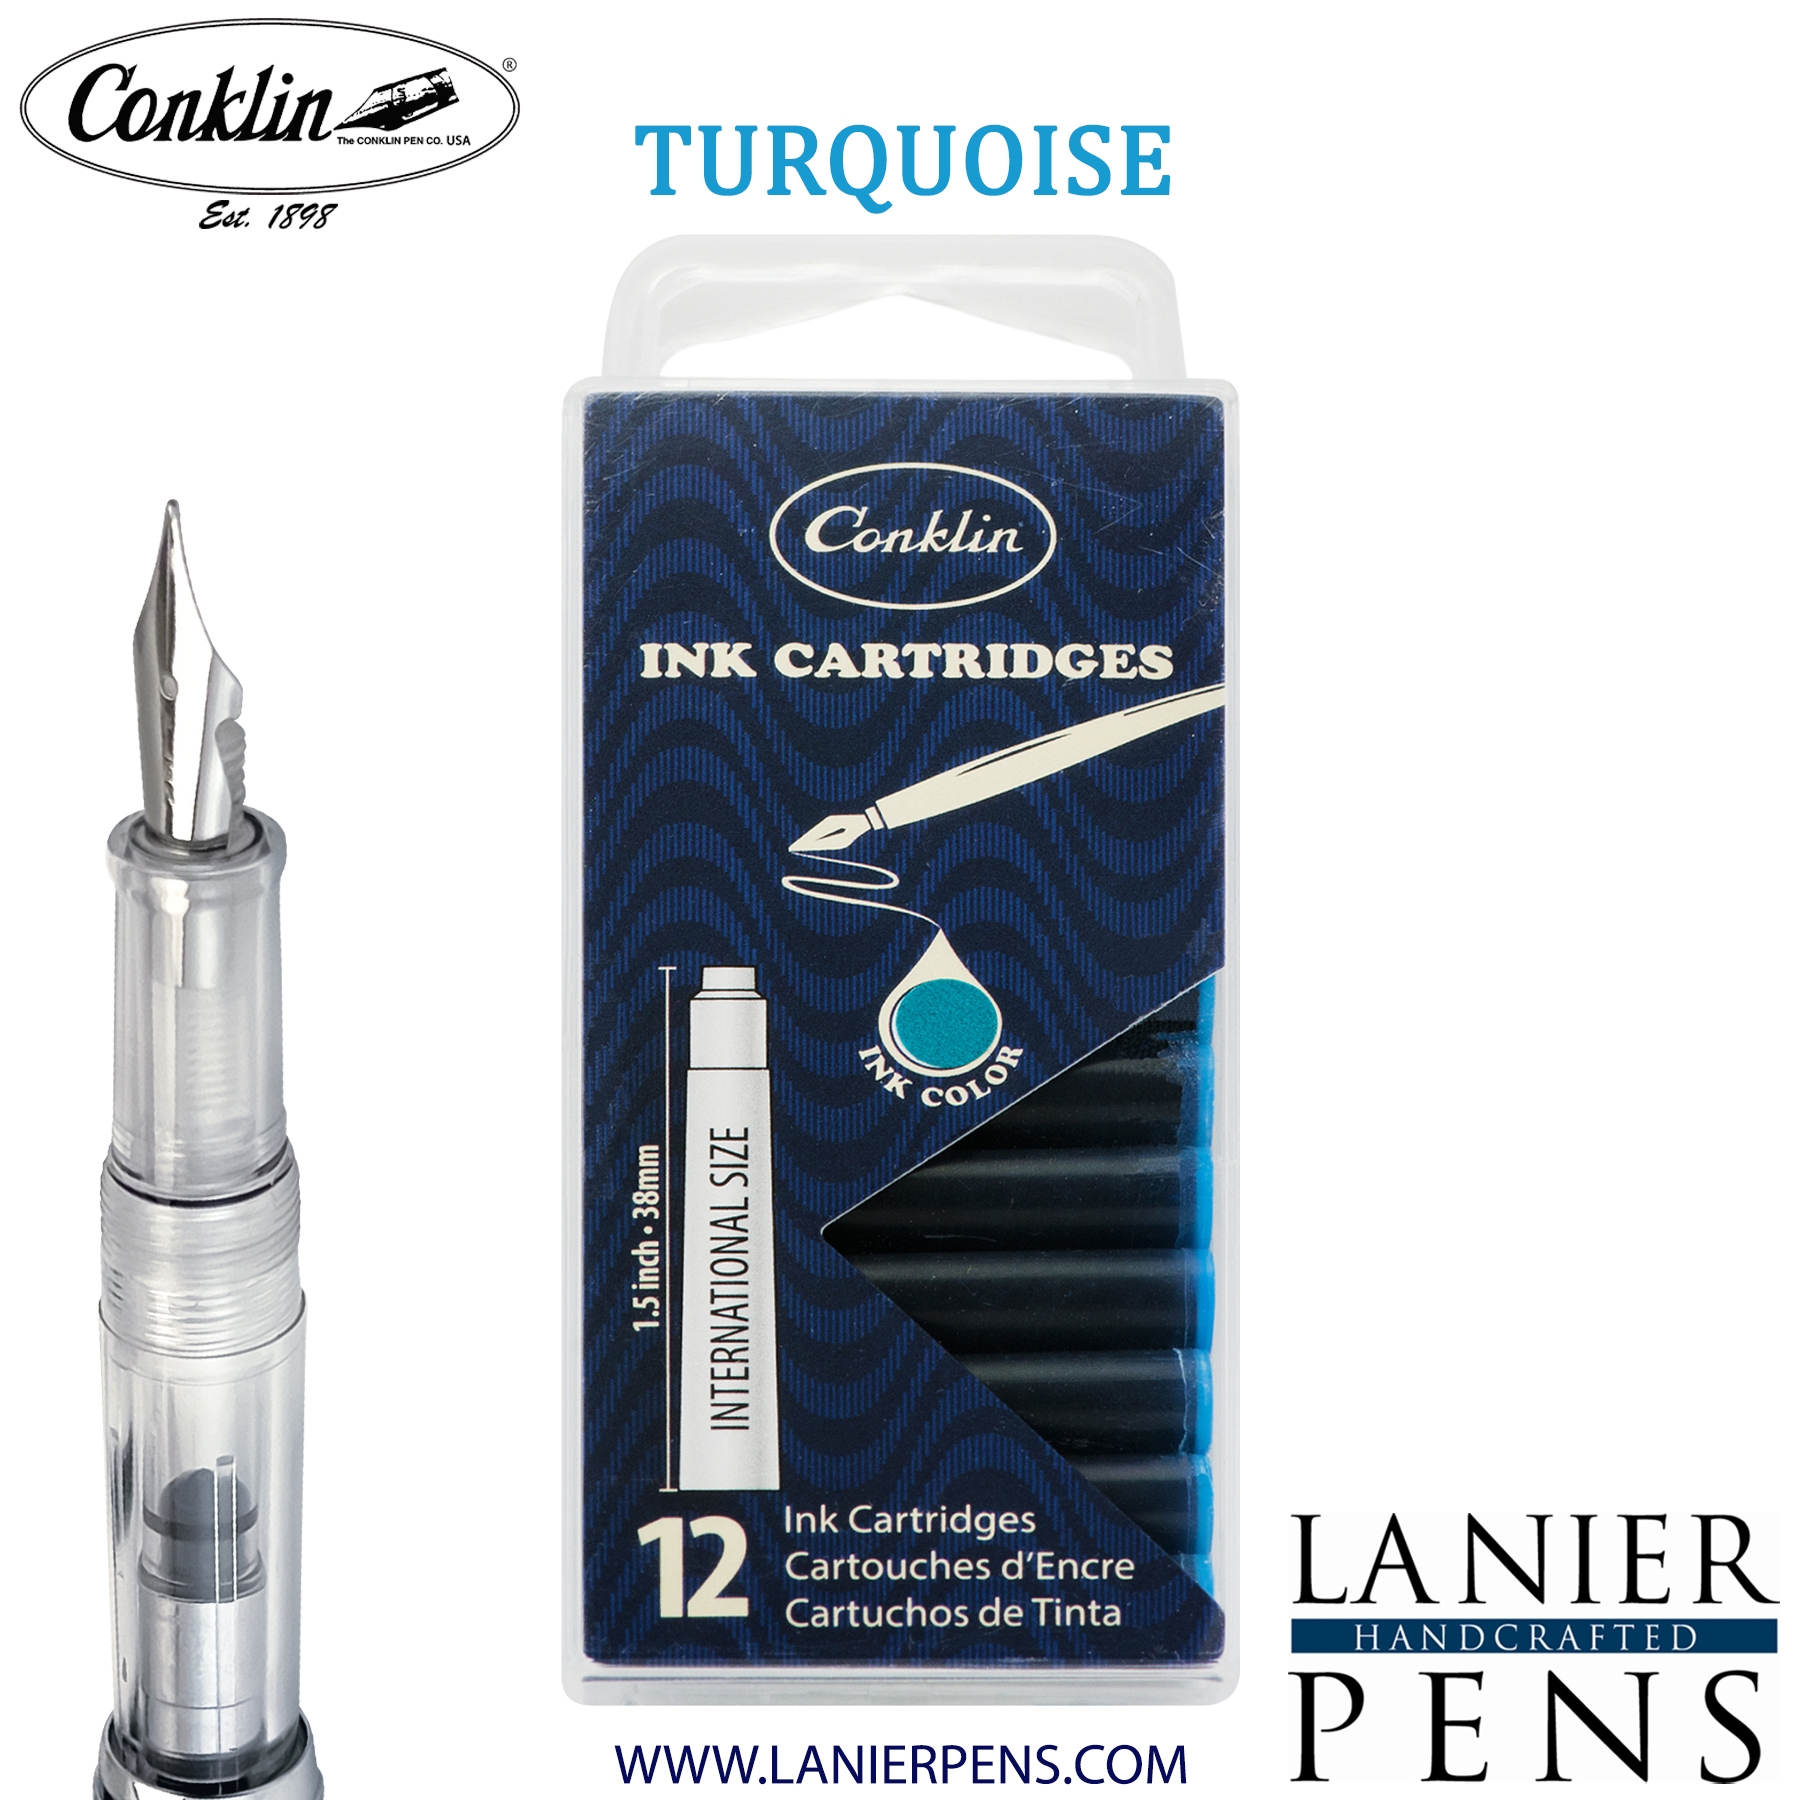 12 Pack Conklin Ink Cartridges - Turquoise By Lanier Pens